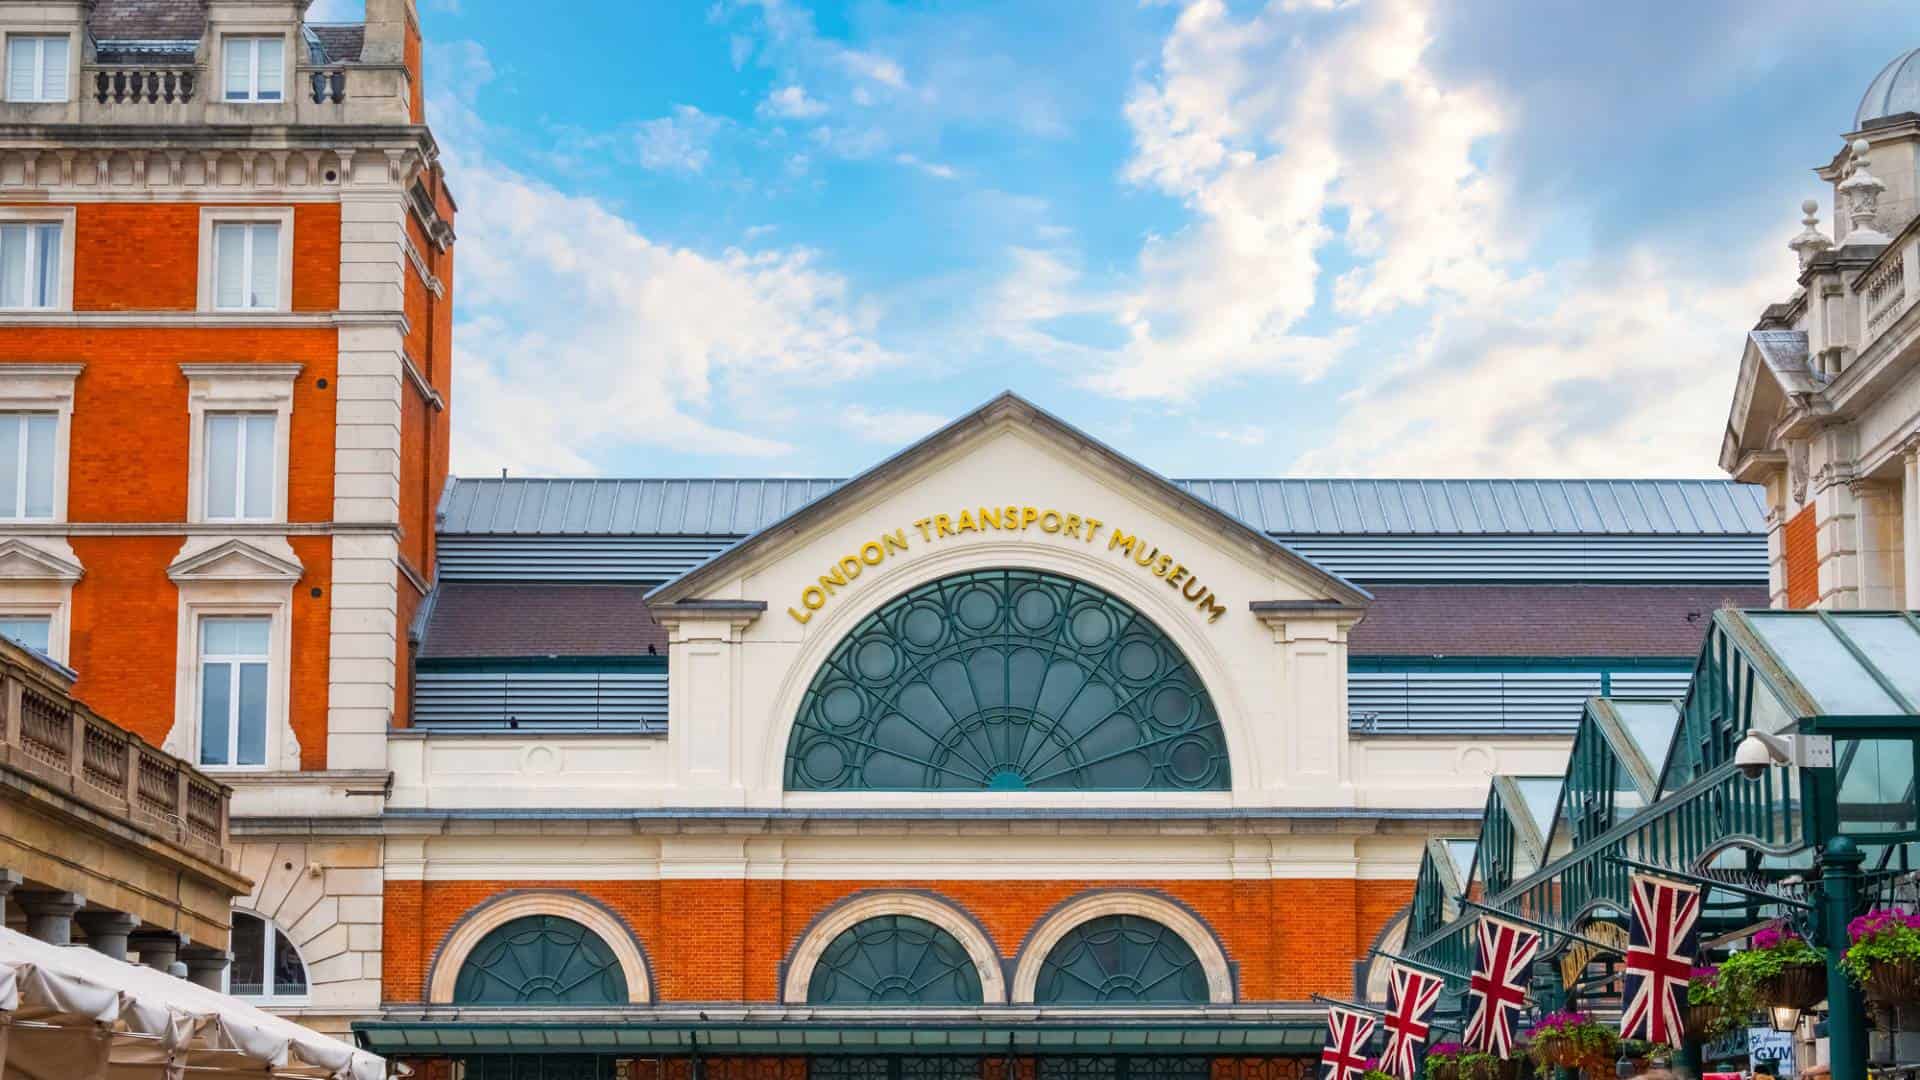 Where are the Best Railway Museums in Europe located?